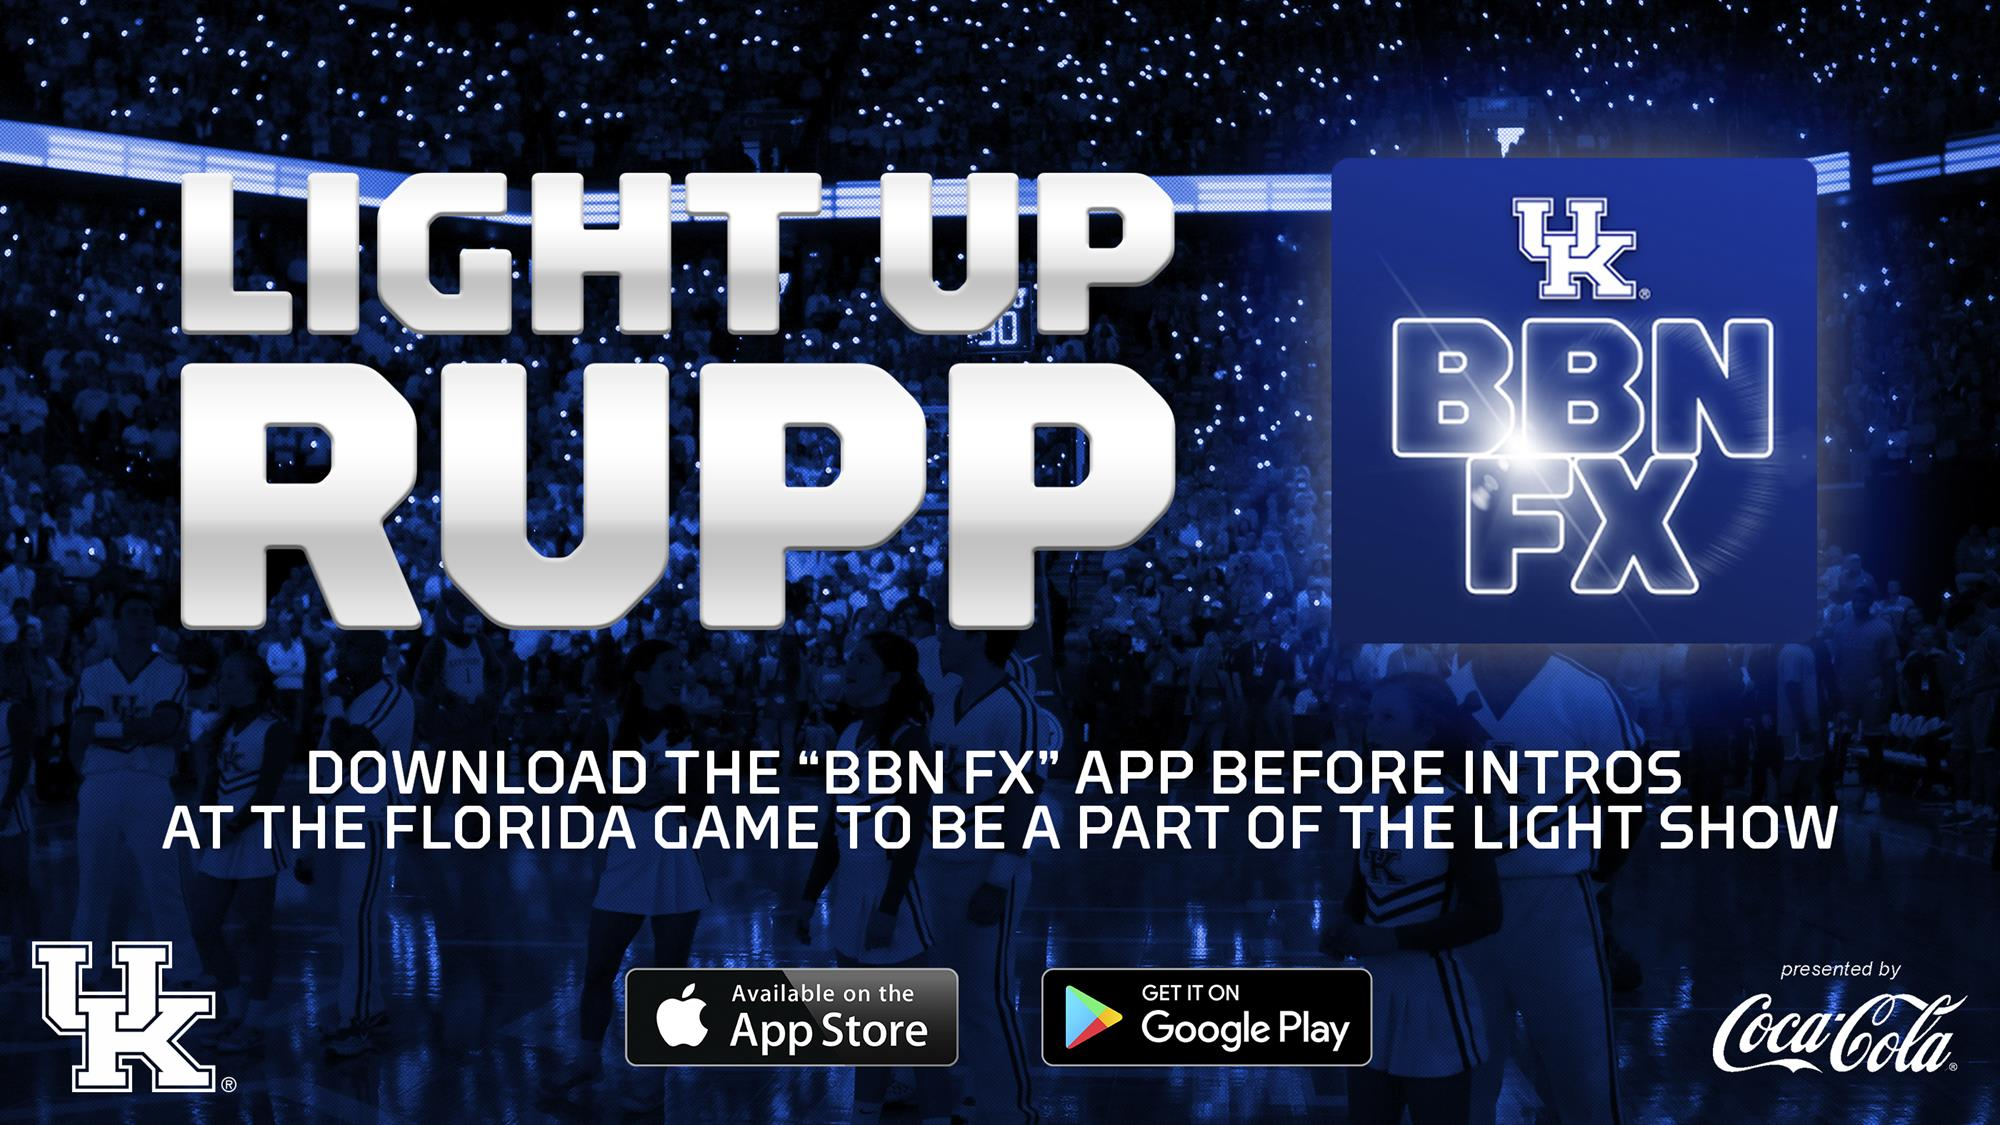 Fans to Bring Pregame Light Show to Rupp with BBN FX App